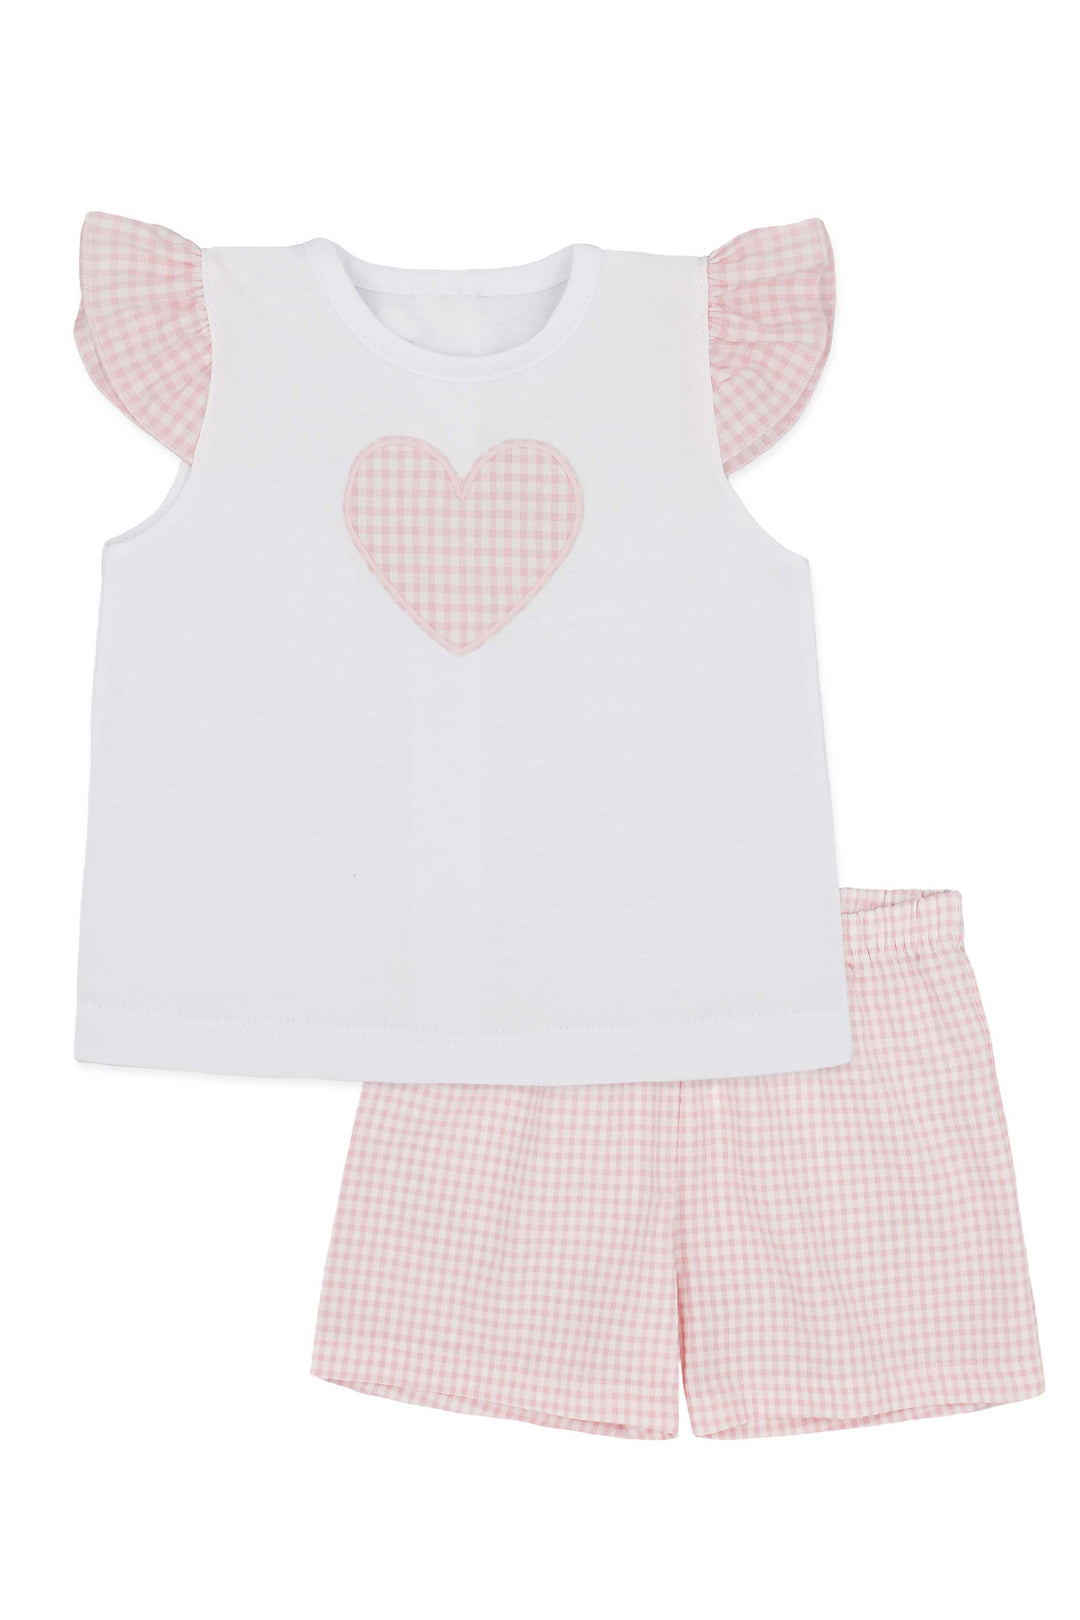 Rapife "Trixie" Pink Gingham Blouse & Shorts | Millie and John